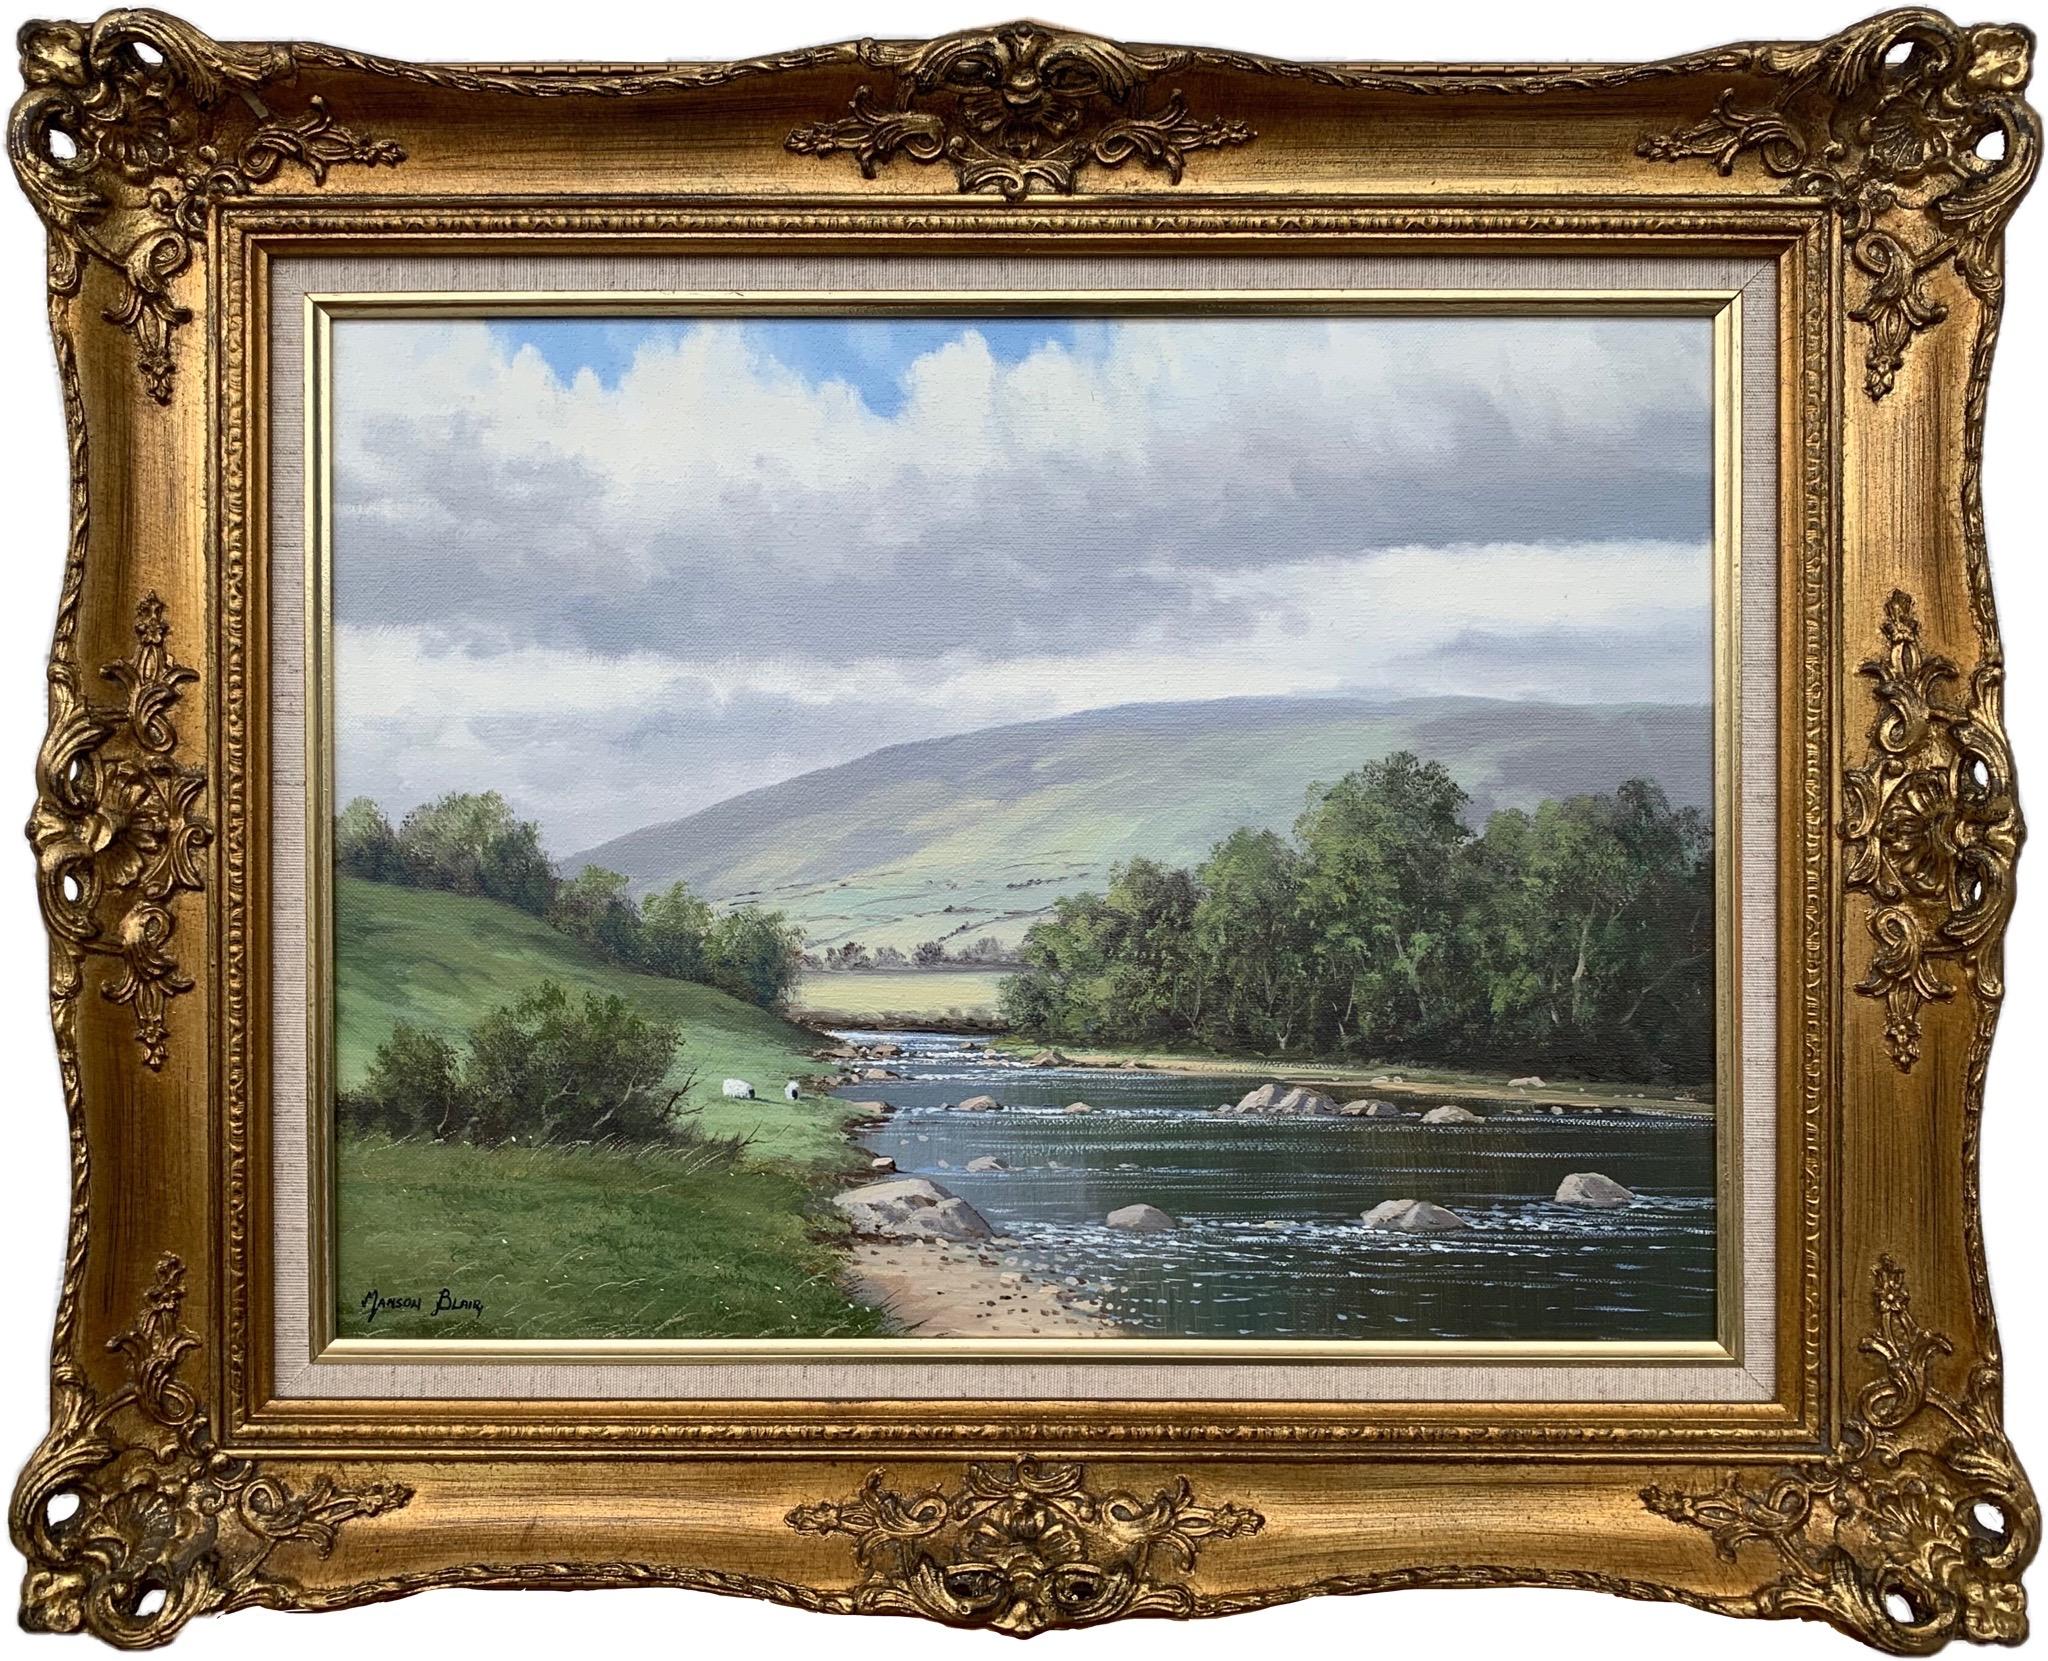 Manson Blair Landscape Painting - Original Oil Painting of the River Dun in County Antrim Ireland by Irish Artist